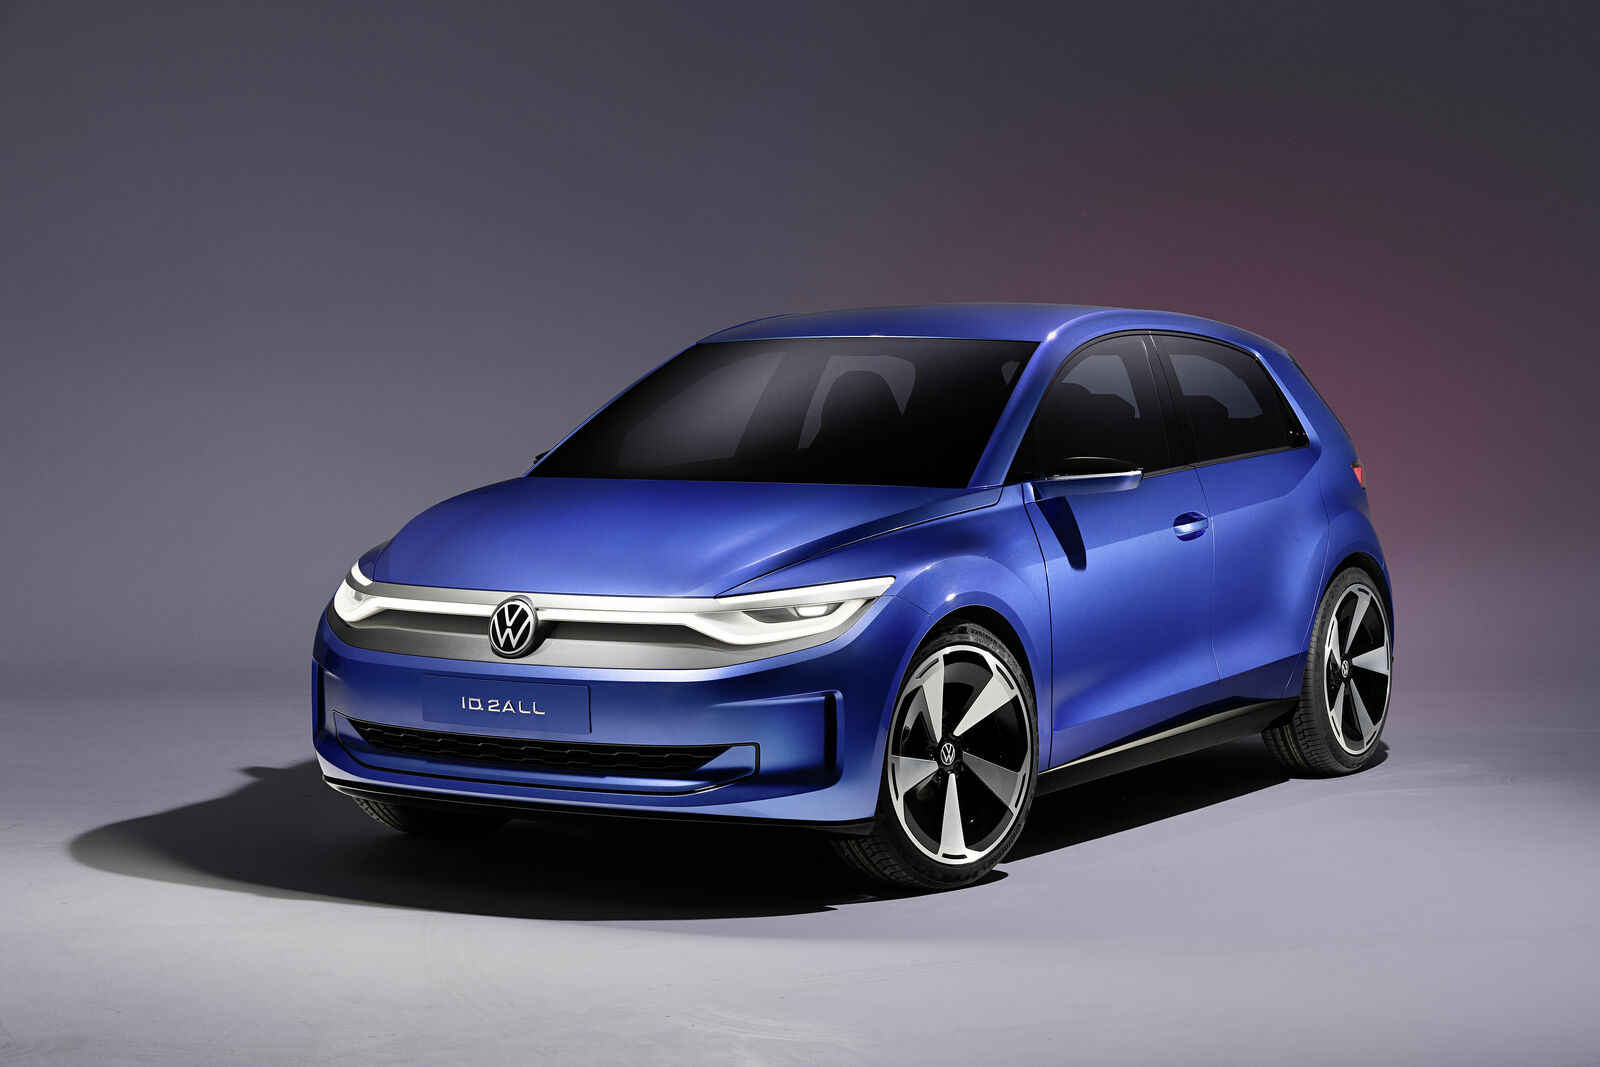 Ontdek Invloed tijger World premiere of the ID. 2all concept: the electric car from Volkswagen  costing less than 25,000 euros | Volkswagen Newsroom